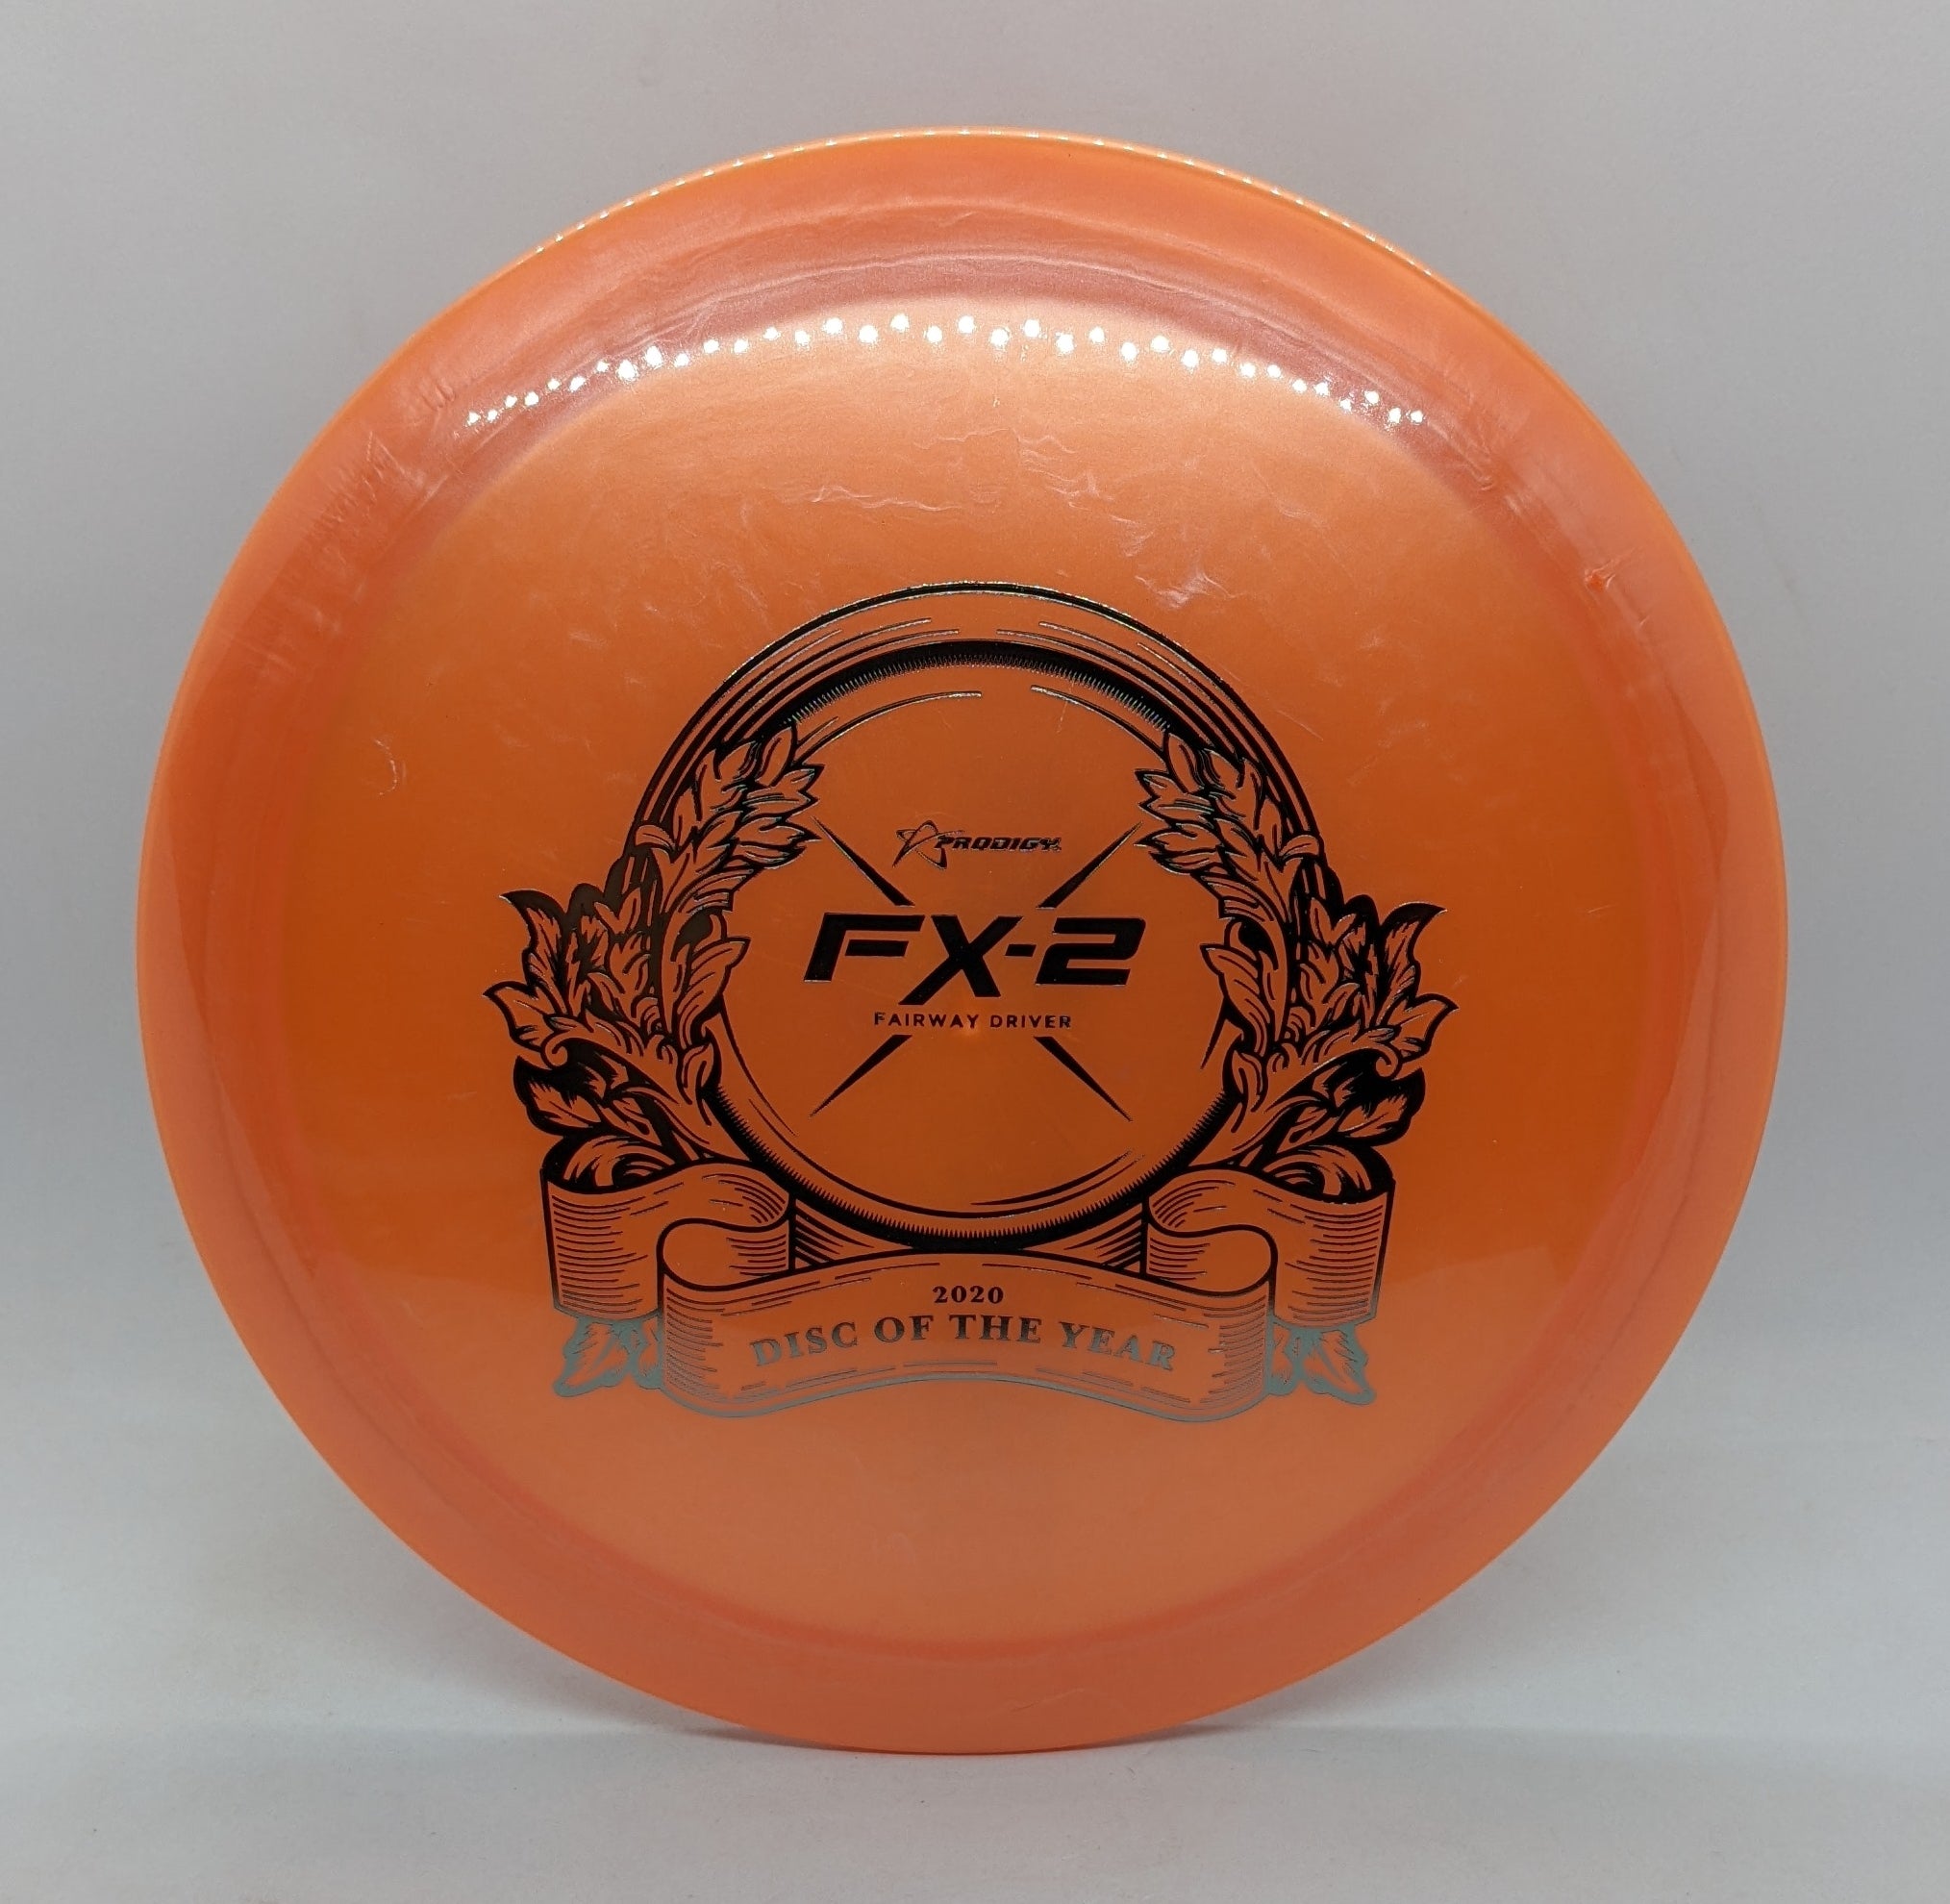 Prodigy FX-2 400G 2020 Disc of the Year Stamp